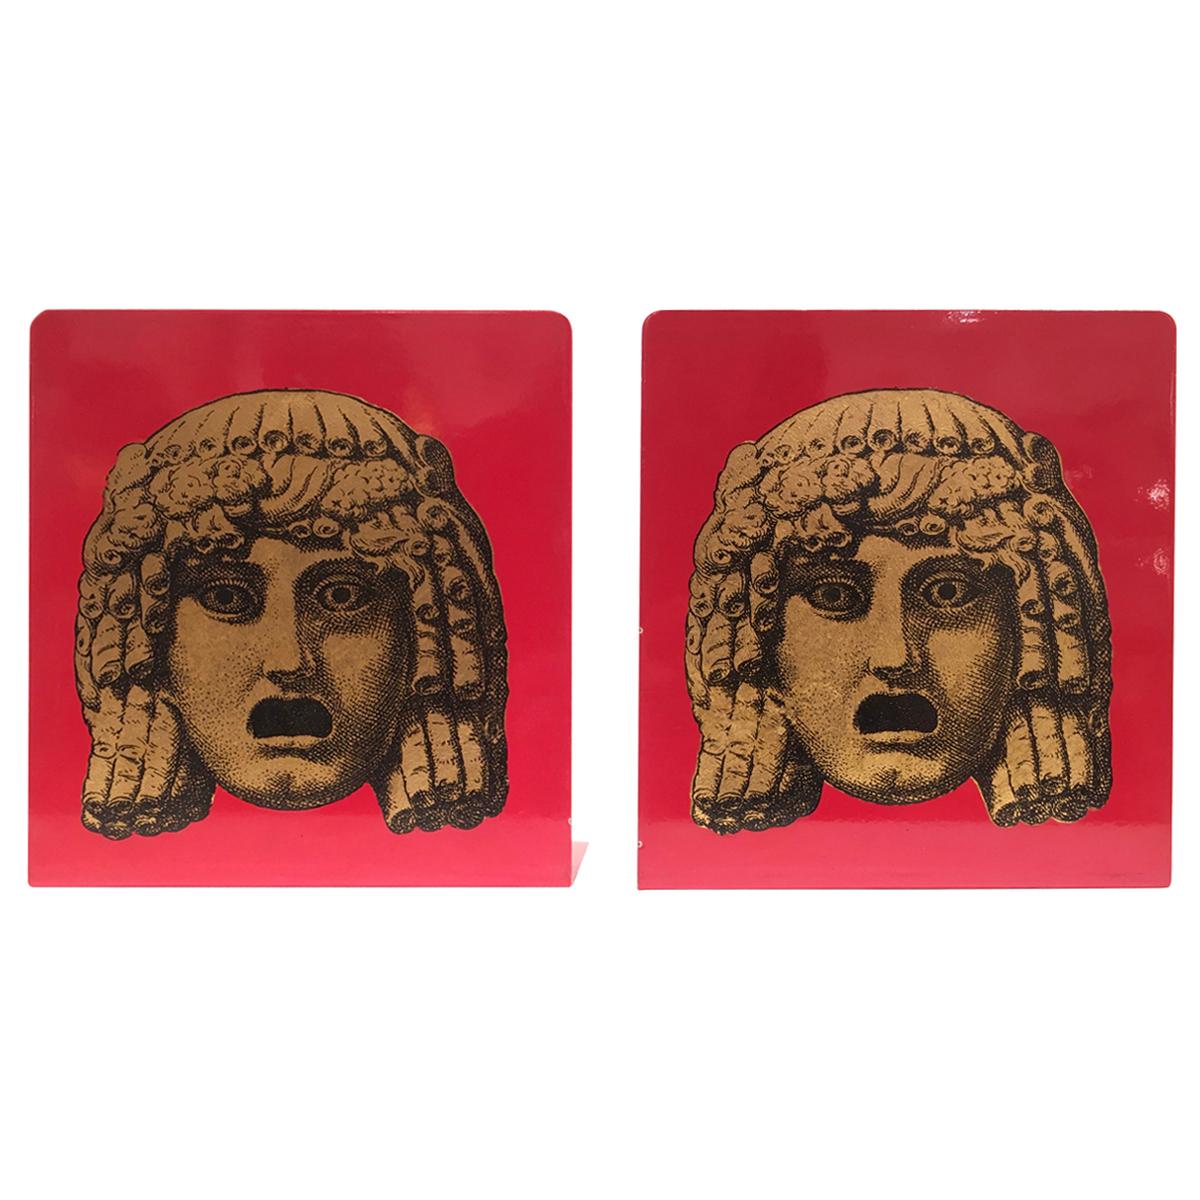 Pair of 'Maschere' (Masks) Bookends by Piero Fornasetti, Italy, circa 1950